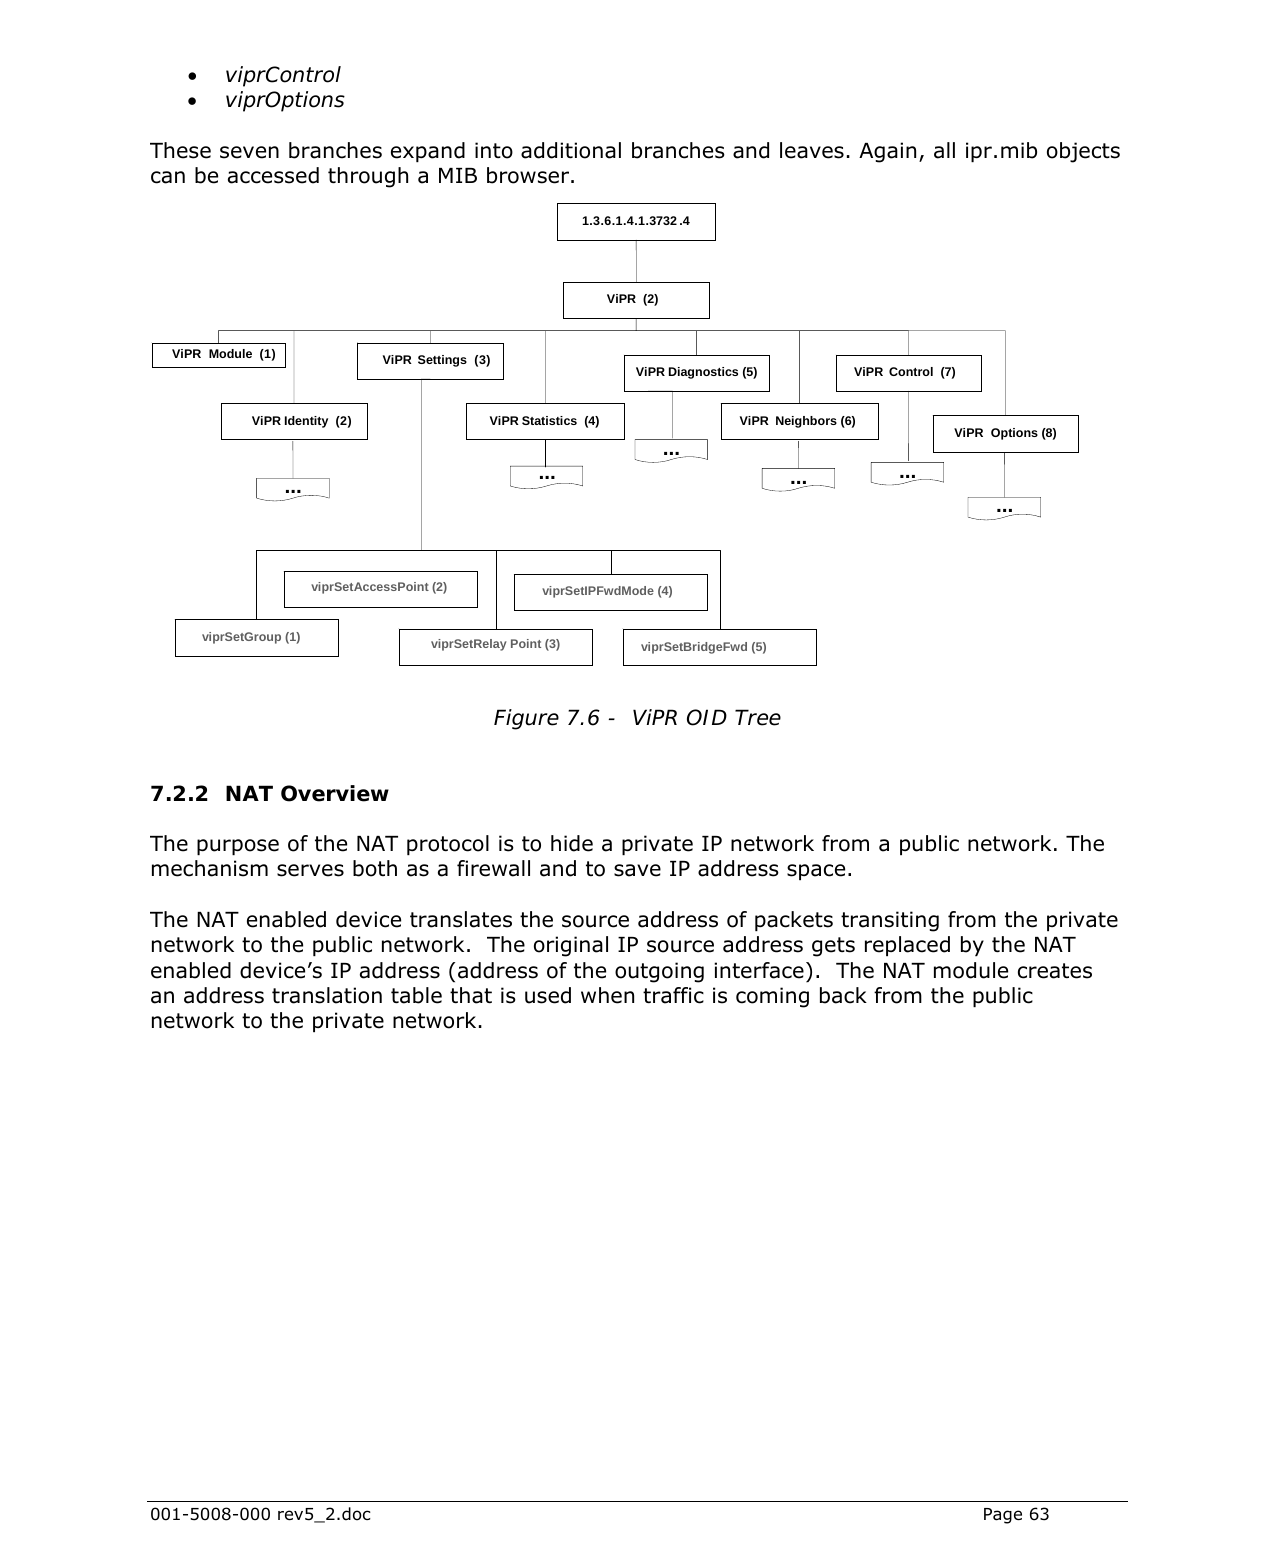  001-5008-000 rev5_2.doc    Page 63 • viprControl  • viprOptions  These seven branches expand into additional branches and leaves. Again, all ipr.mib objects can be accessed through a MIB browser.              Figure 7.6 -  ViPR OID Tree  7.2.2 NAT Overview The purpose of the NAT protocol is to hide a private IP network from a public network. The mechanism serves both as a firewall and to save IP address space.  The NAT enabled device translates the source address of packets transiting from the private network to the public network.  The original IP source address gets replaced by the NAT enabled device’s IP address (address of the outgoing interface).  The NAT module creates an address translation table that is used when traffic is coming back from the public network to the private network.   ViPR Module  ( 1 ) ViPR Identity  ( 2 ) ViPR Settings  ( 3 ) ViPR Diagnostics (5)  ViPR Neighbors (6)  ViPR Control  (7) ViPR Options (8)  ViPR  (2) ViPR Statistics  (4)  1 . 3 . 6 . 1 . 4 . 1 . 3732 . 4 ... ... ... ... ... ... viprSetRelay Point (3)  viprSetIPFwdMode (4)  viprSetBridgeFwd (5)  viprSetGroup (1)  viprSetAccessPoint (2) 